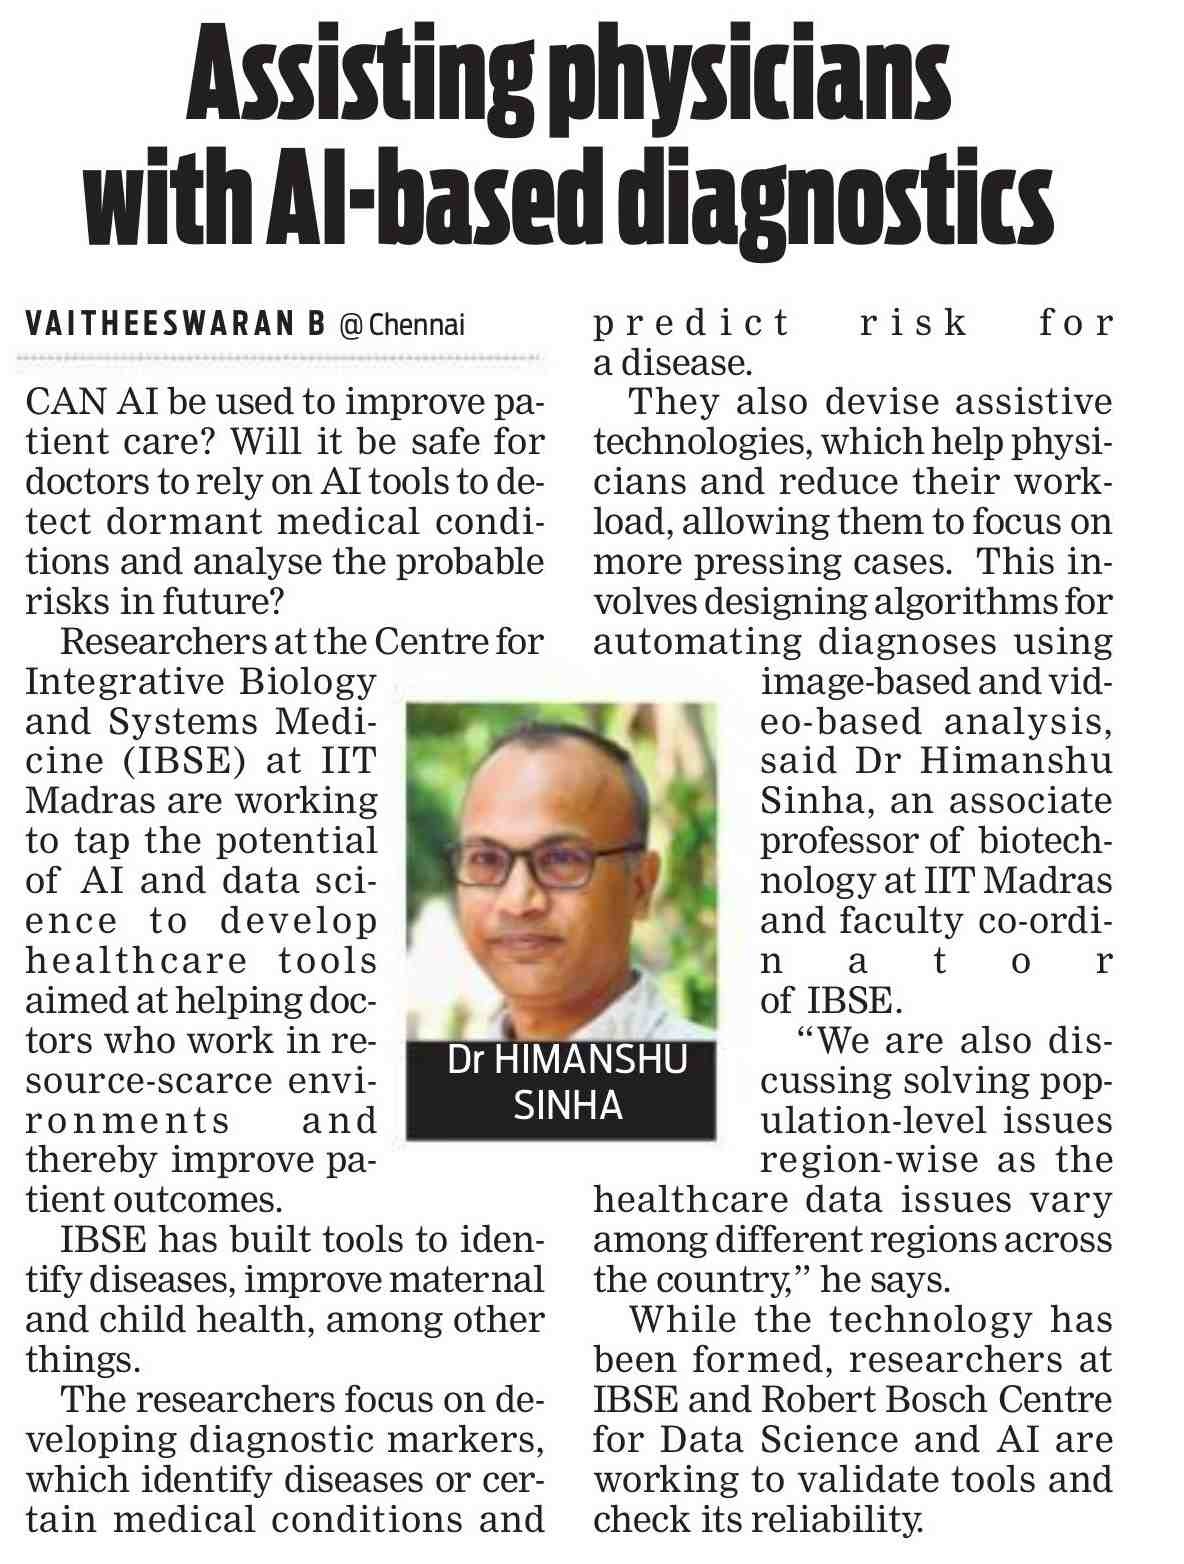 IITM researchers led by Prof Himanshu Sinha develop AI based diagnostics tools for helping physicians